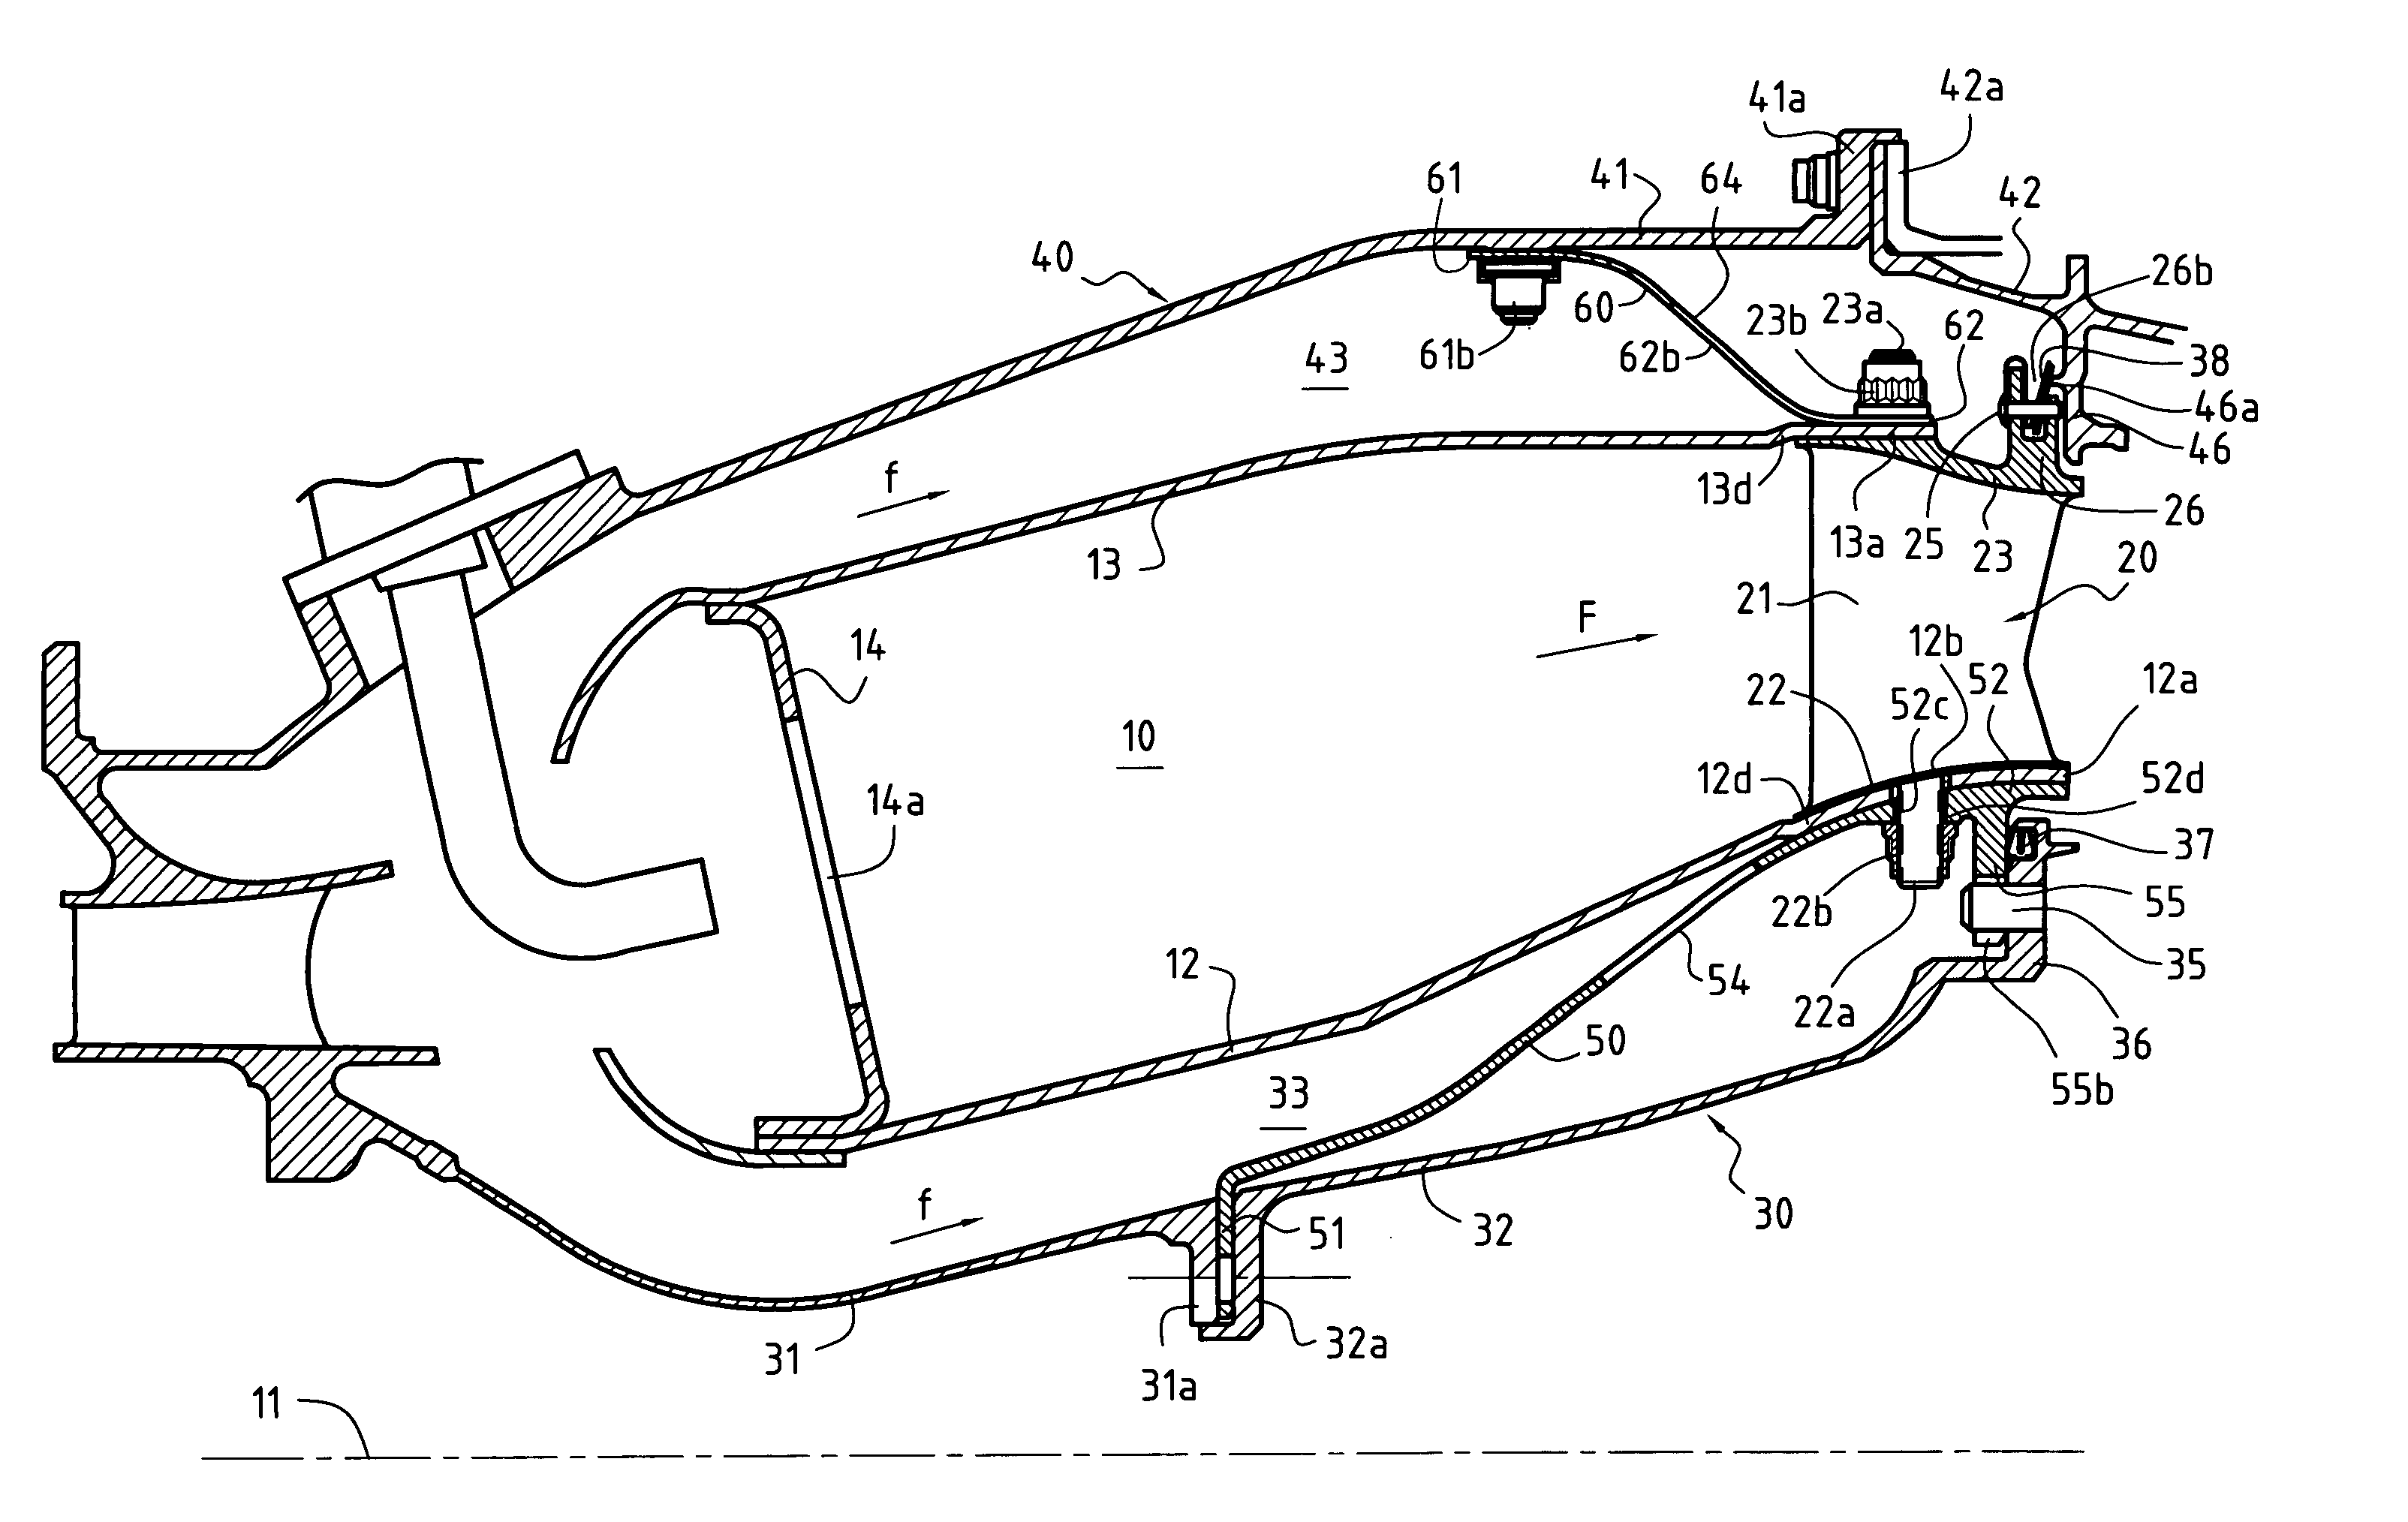 Assembly comprising a gas turbine combustion chamber integrated with a high pressure turbine nozzle